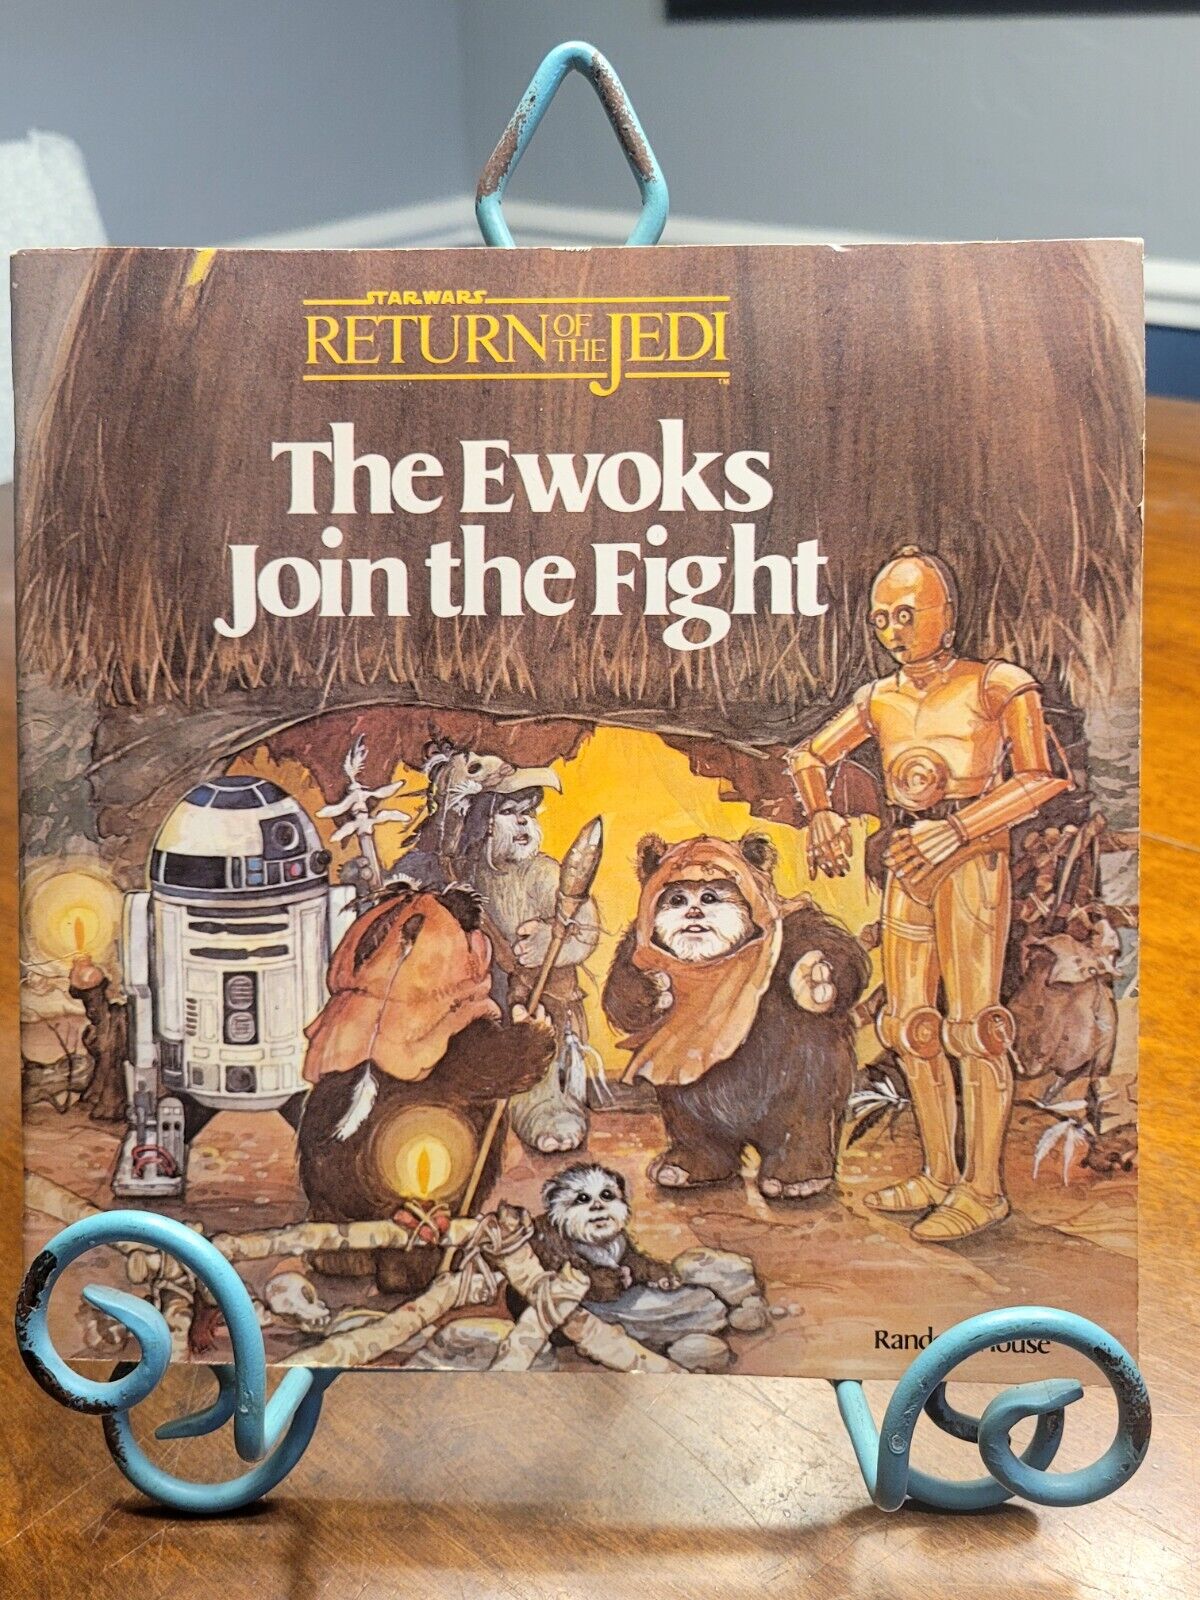 Vintage Star Wars Return of the Jedi The Ewoks Join The Fight Book Random House